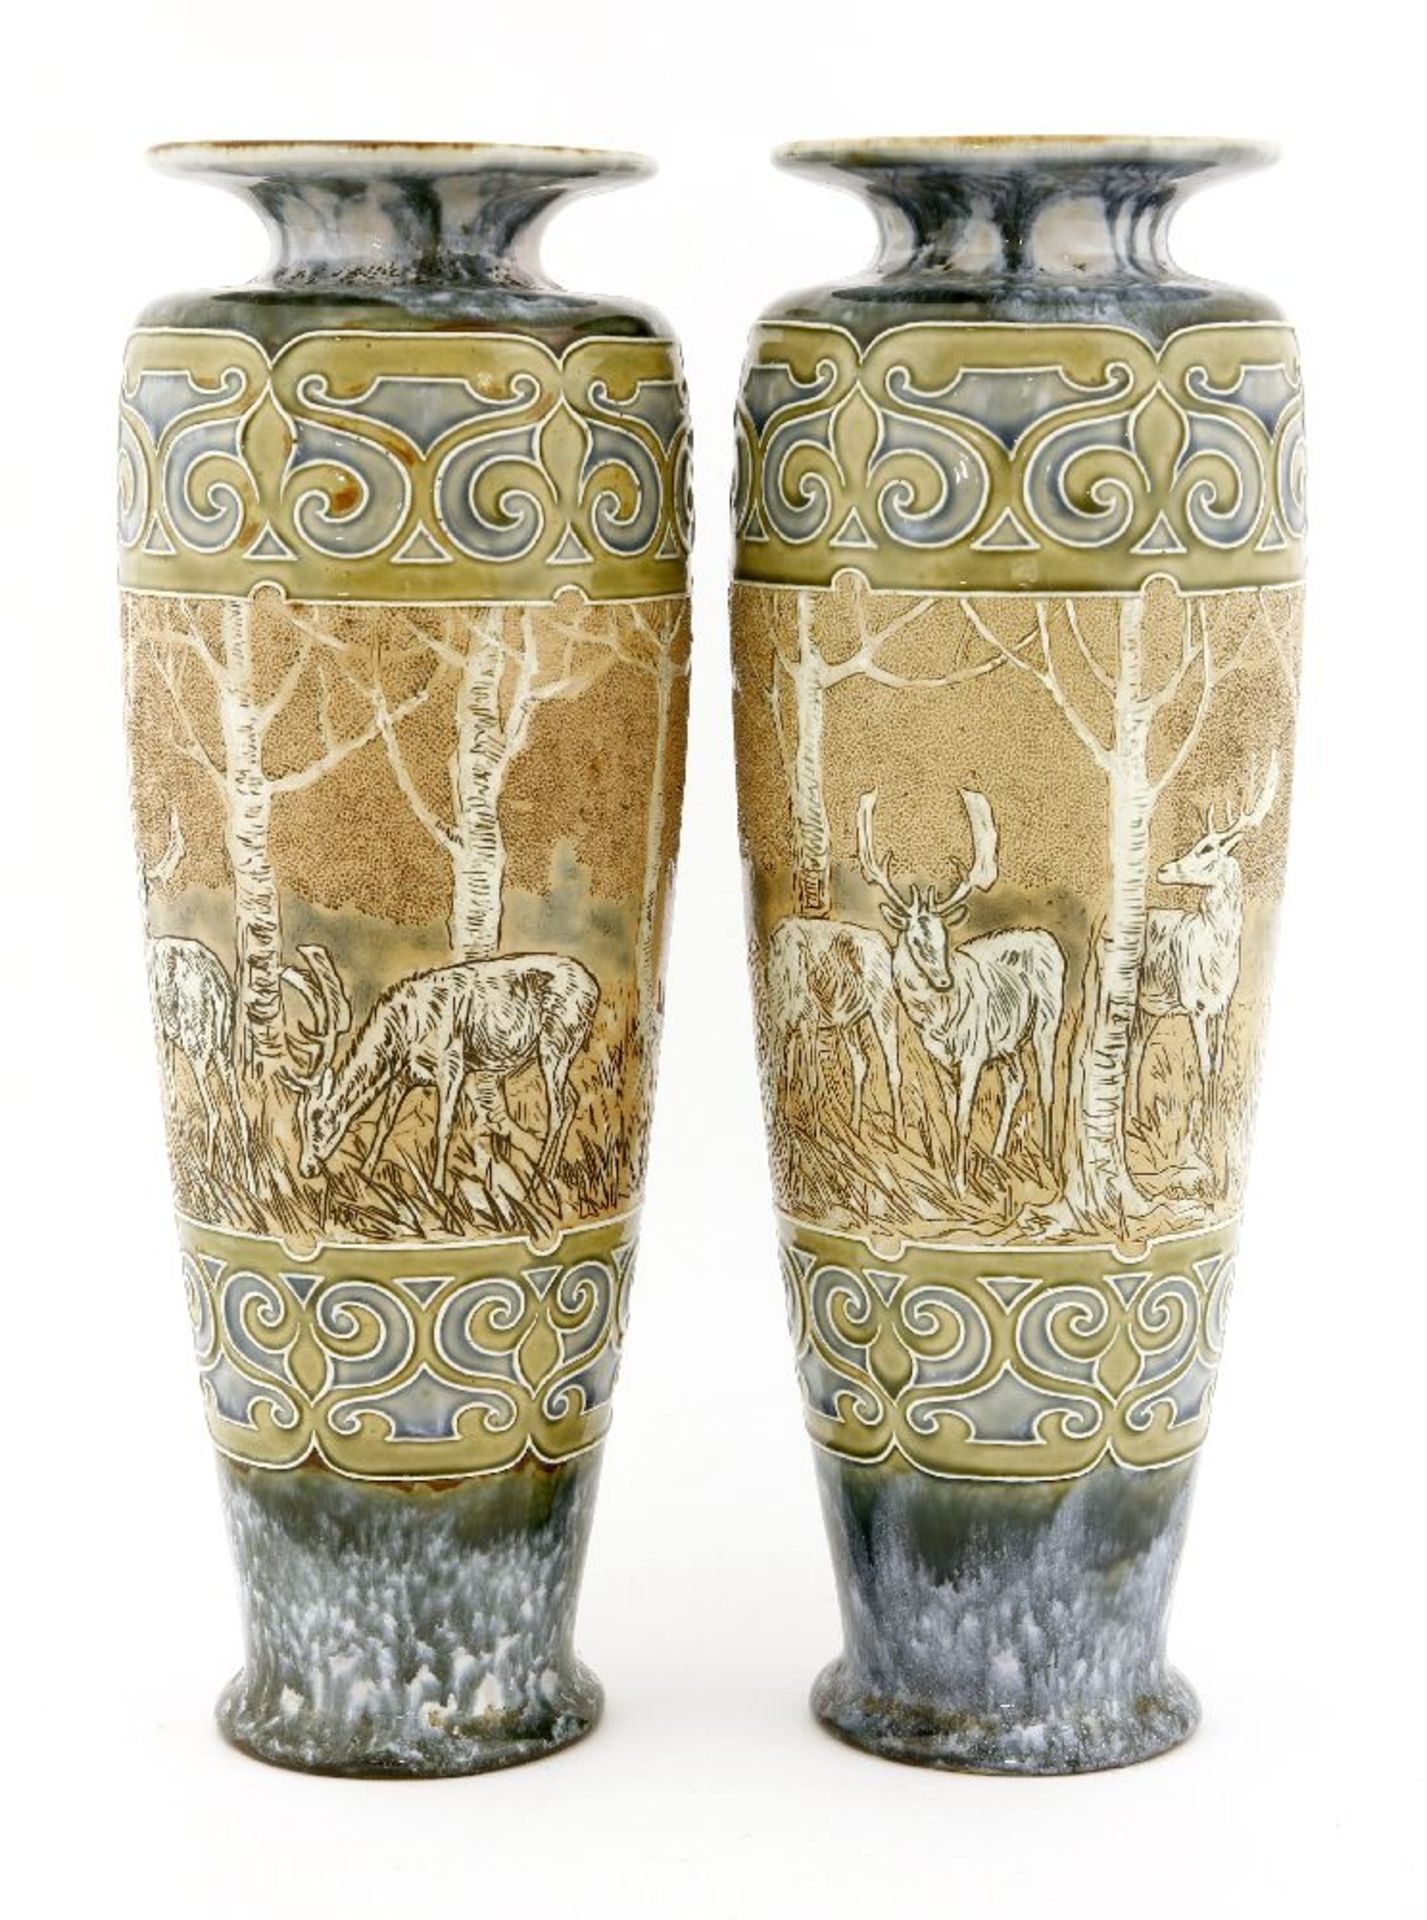 A pair of Royal Doulton stoneware vases,by Hannah Barlow, each incised with a band of deer, - Image 2 of 3